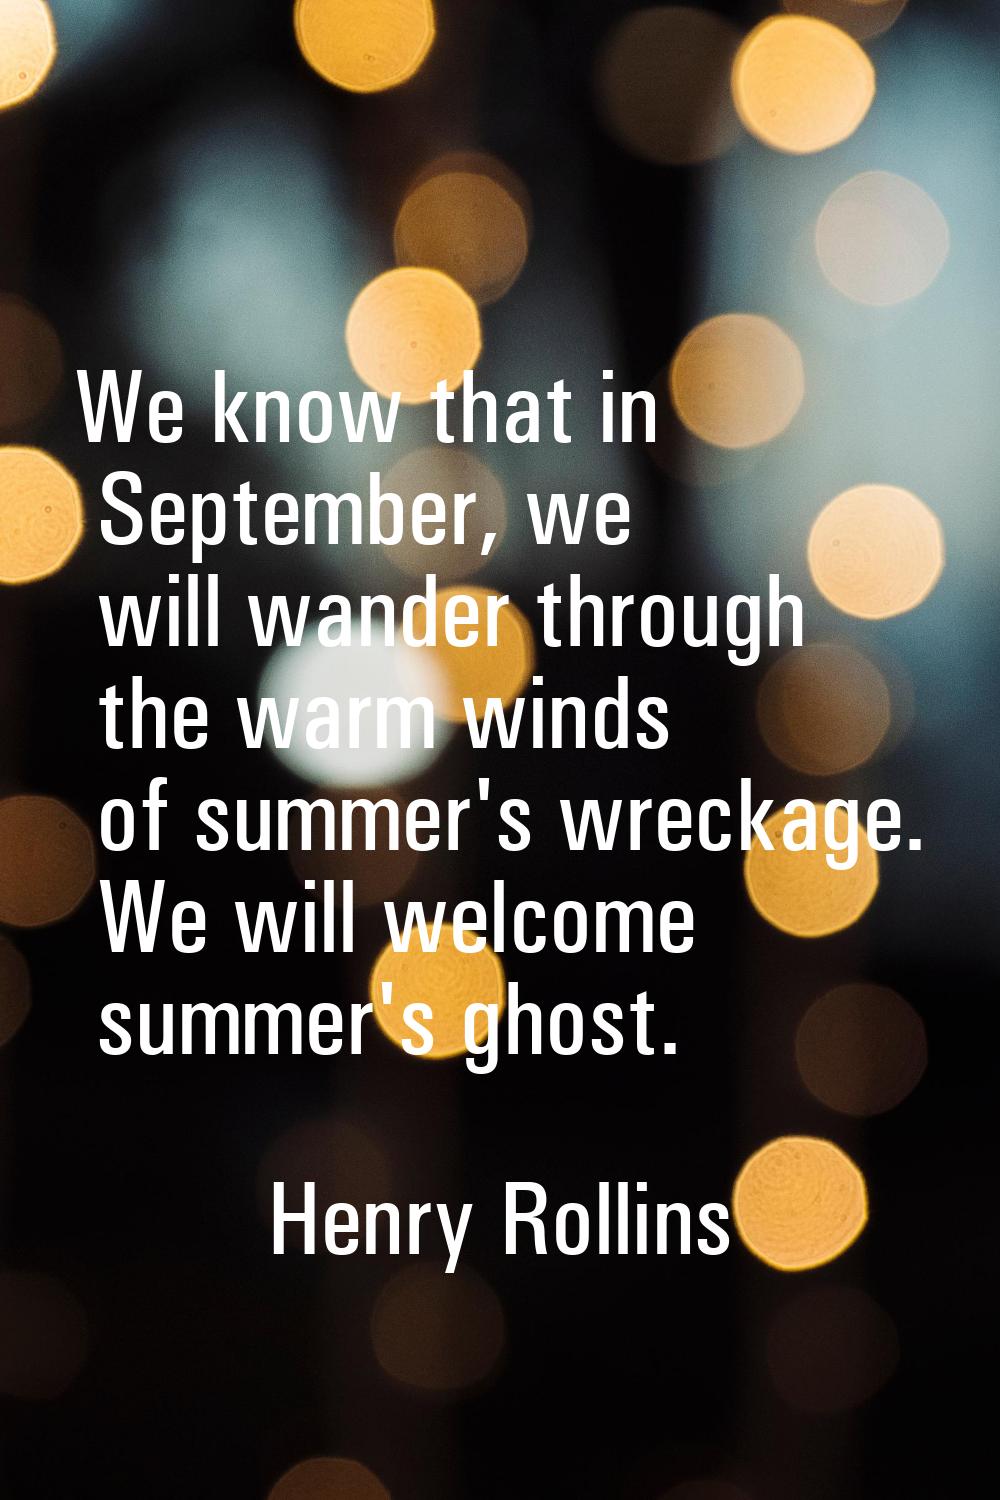 We know that in September, we will wander through the warm winds of summer's wreckage. We will welc